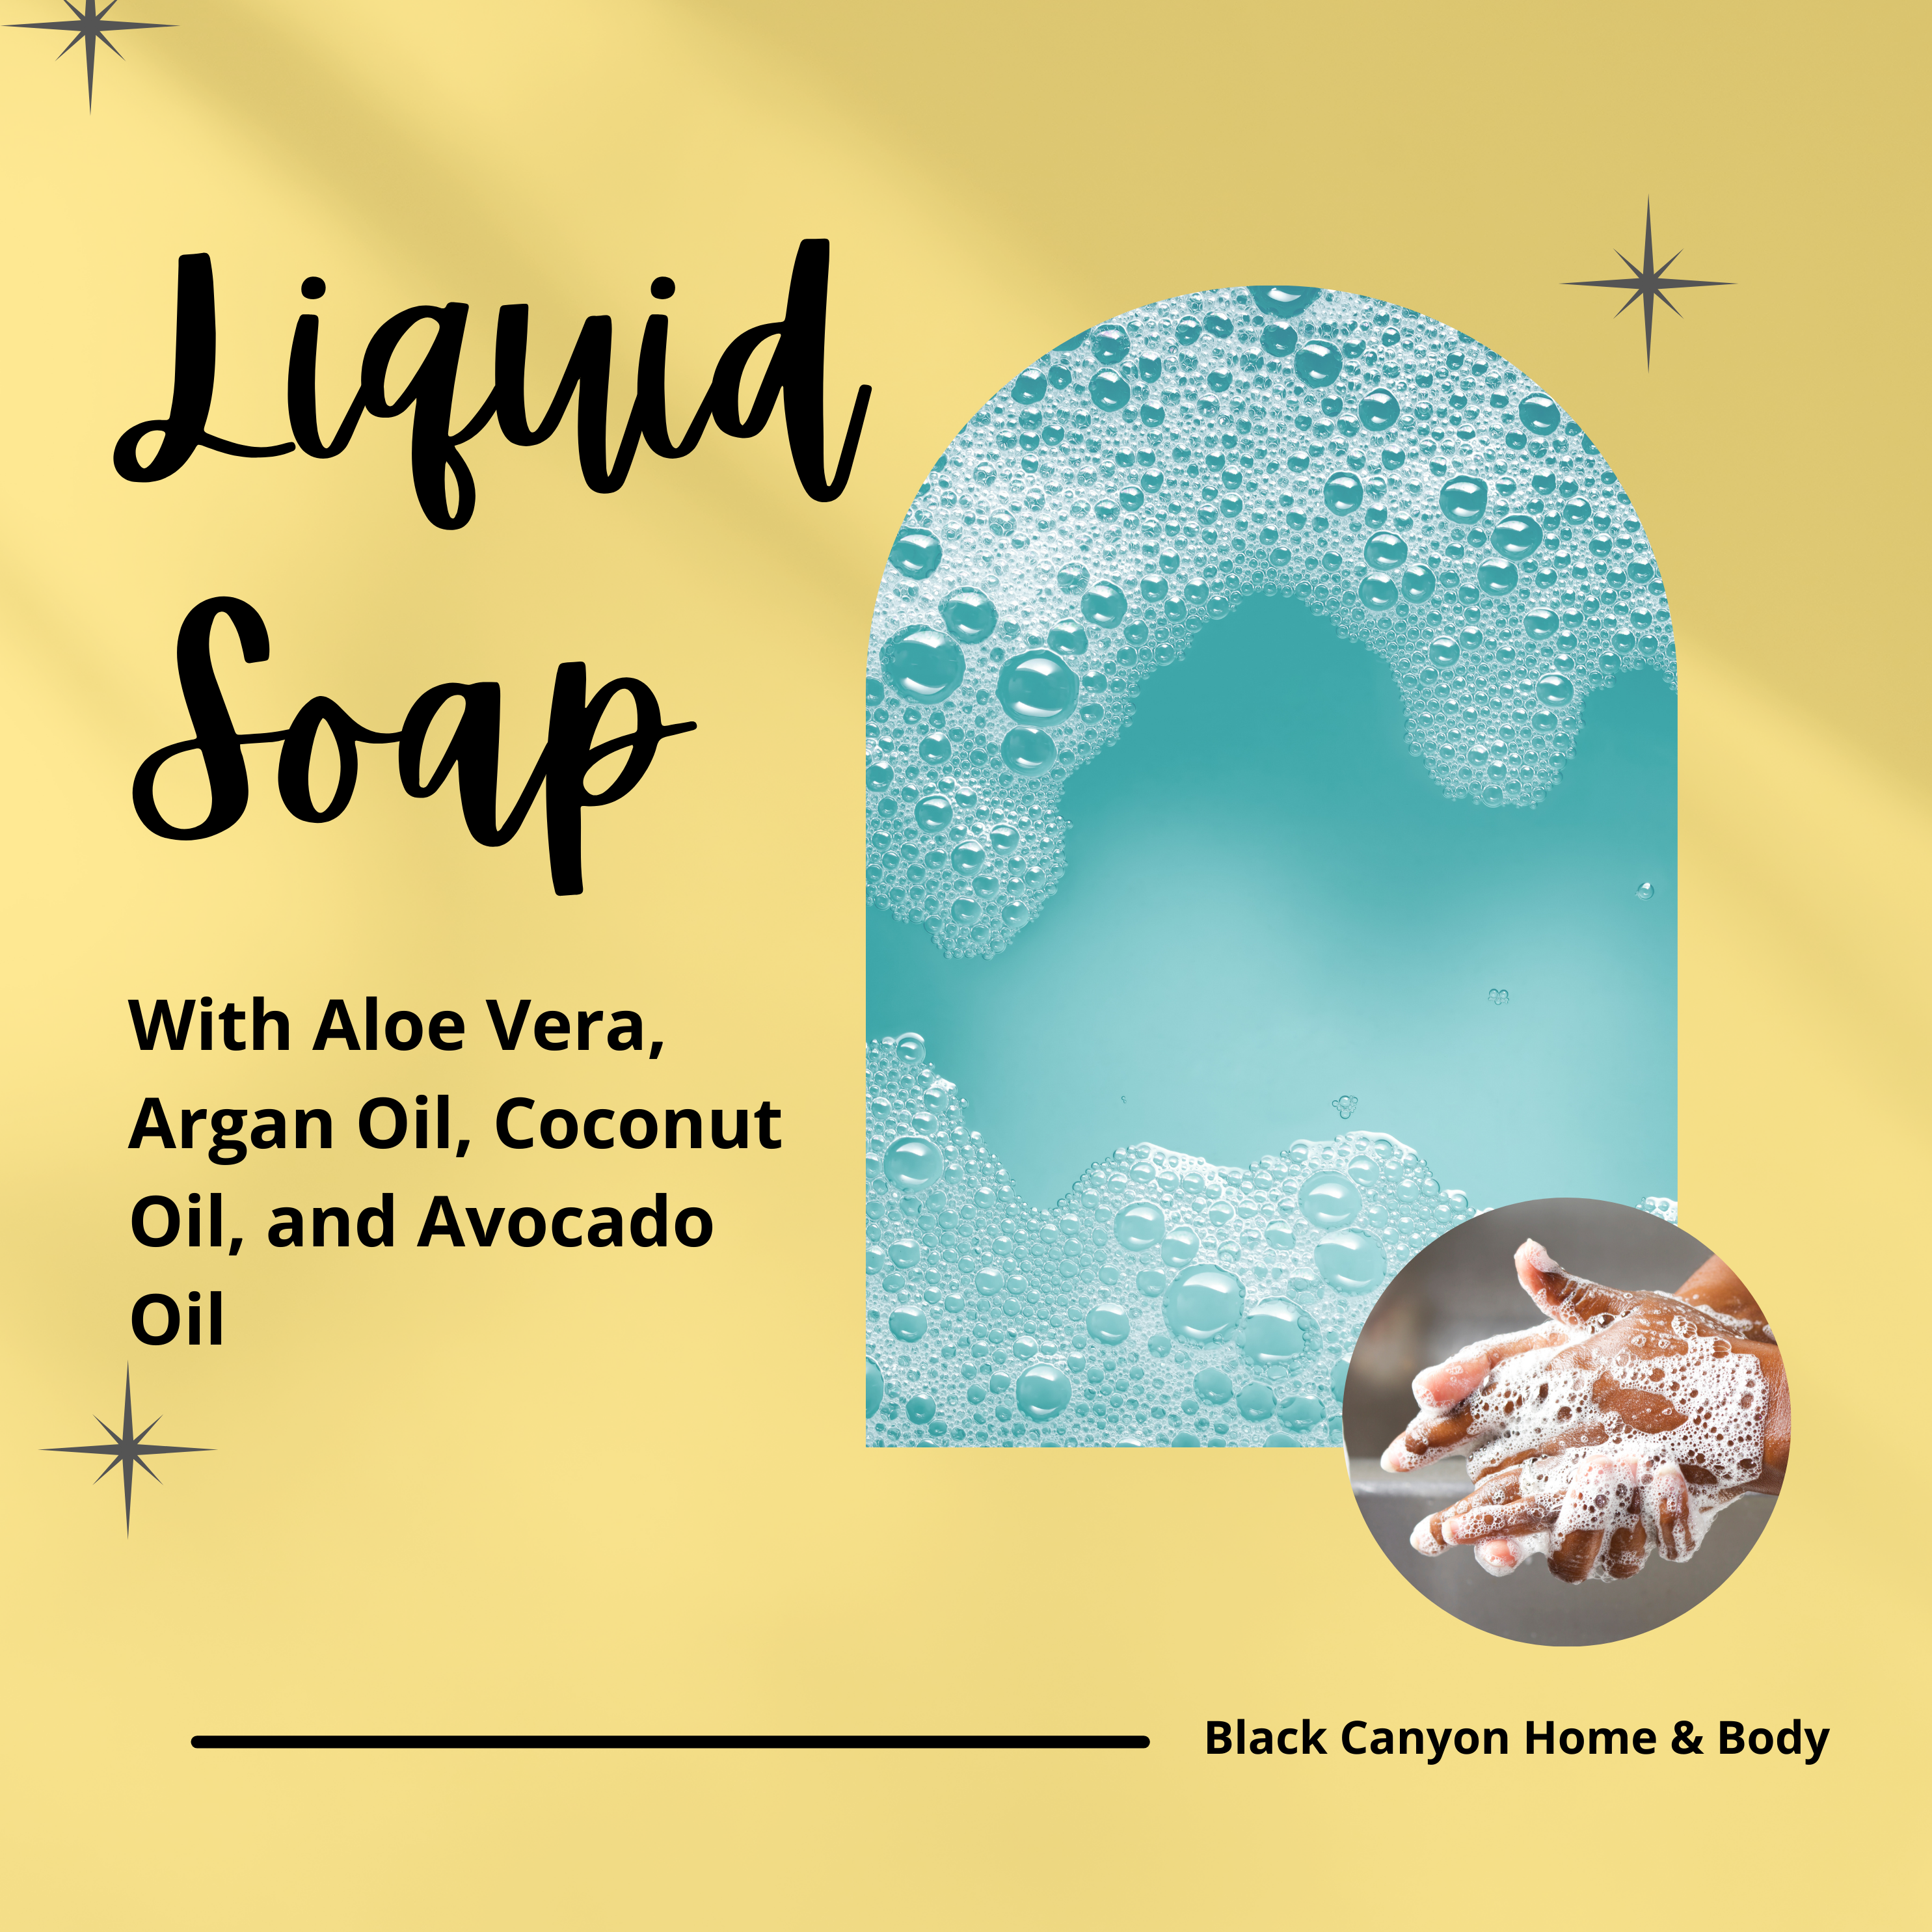 Black Canyon April Showers Scented Liquid Hand Soap